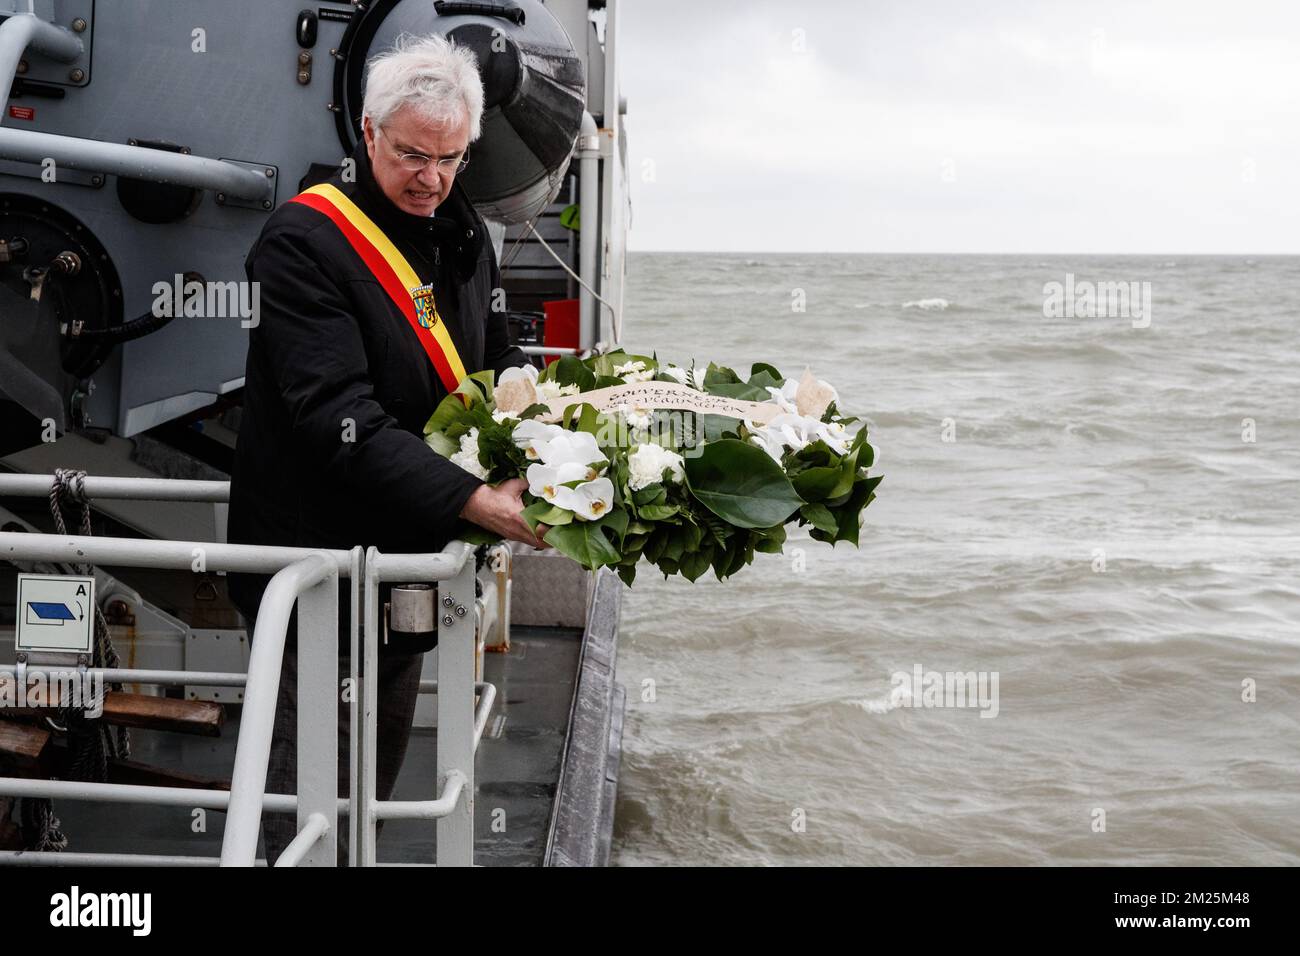 West-Flanders province governor Carl Decaluwe pictured during the 30th anniversary of the Herald of Free Enterprise ferry disaster, on Monday 06 March 2017 in Zeebrugge. On 6 March 1987 the ferry left the harbor of Zeebrugge, bound for Dover with more than 450 passengers and 80 crew members on board. It capsized just outside the harbor. The disaster, which was caused by the failure to close the bow doors, cost the life of 194 people. BELGA PHOTO KURT DESPLENTER Stock Photo